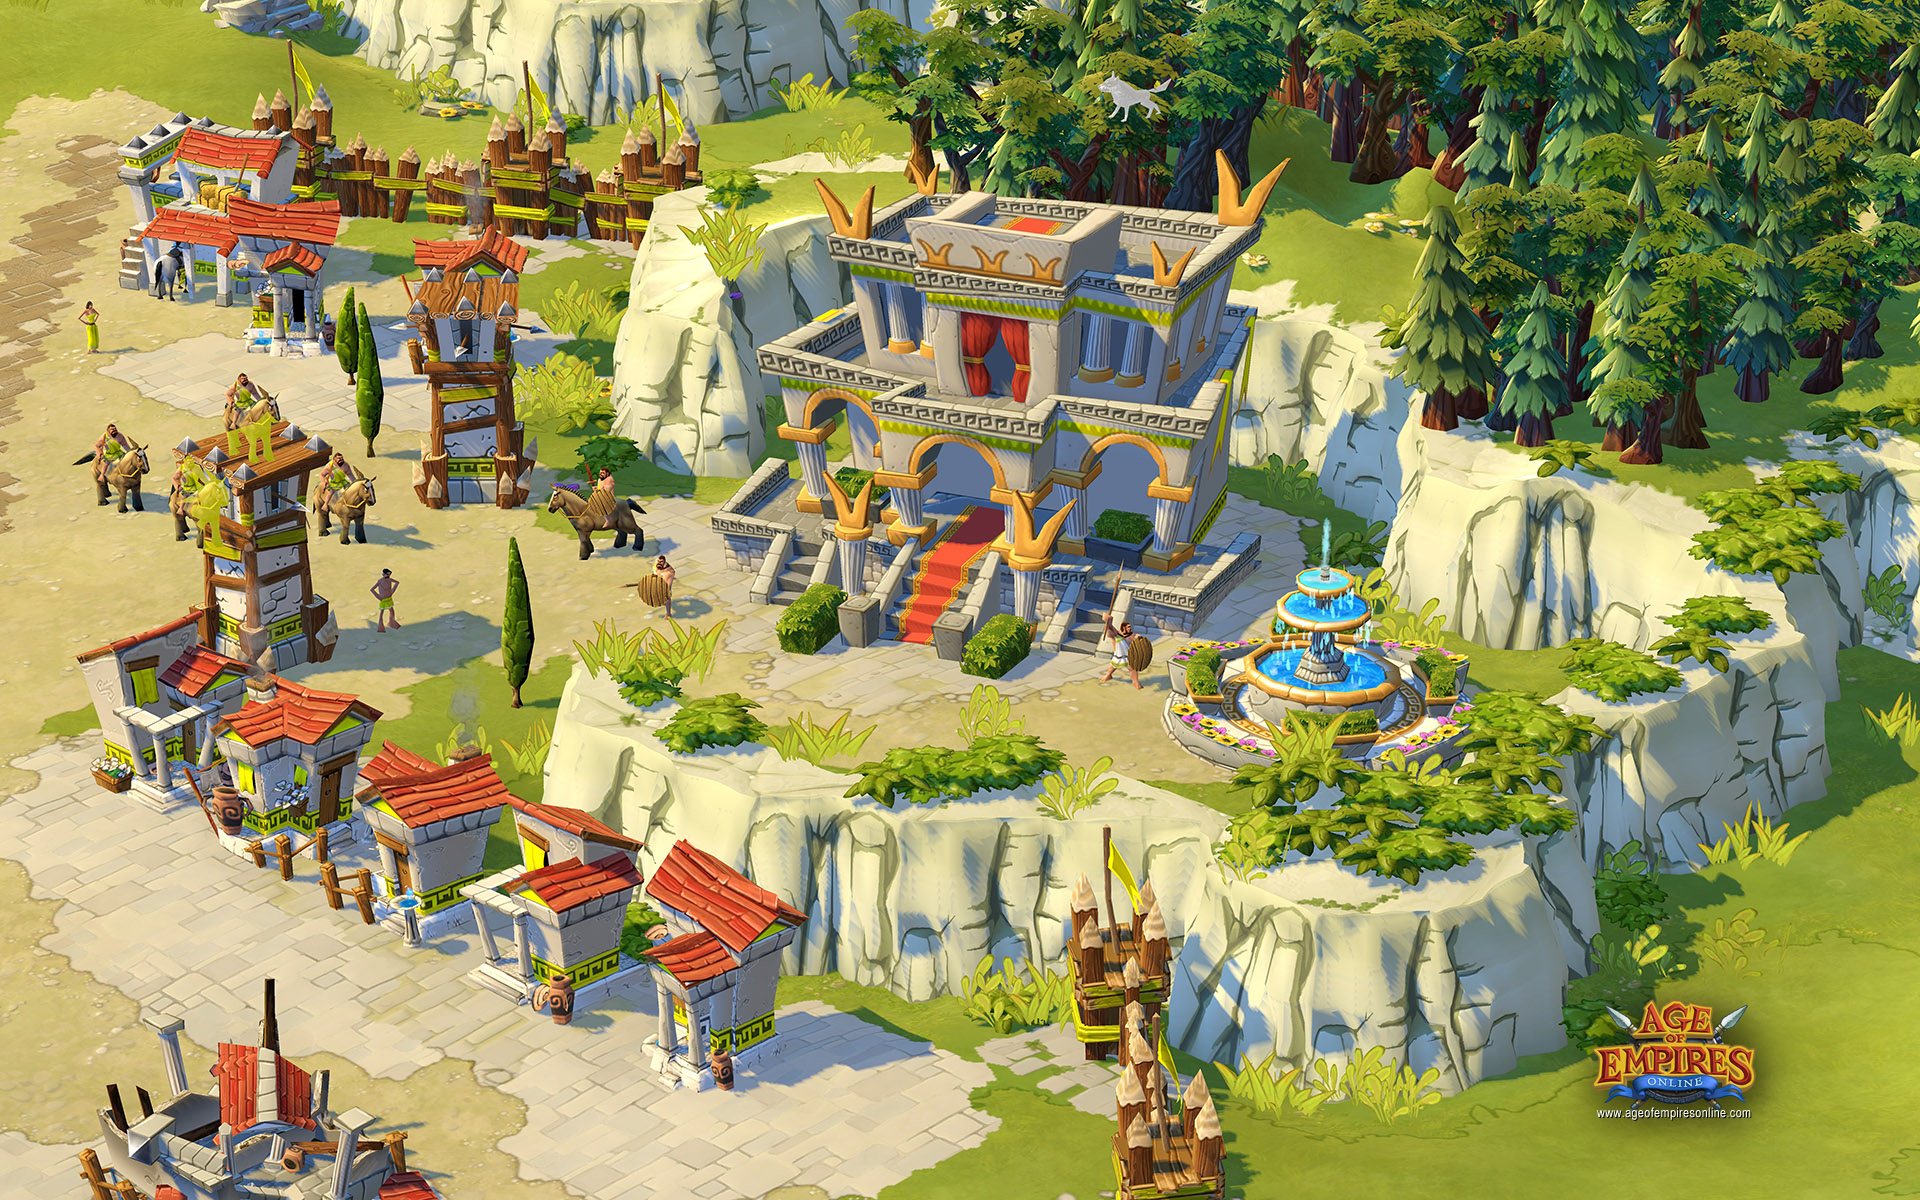 age of empires wallpaper,strategy video game,human settlement,residential area,urban design,illustration